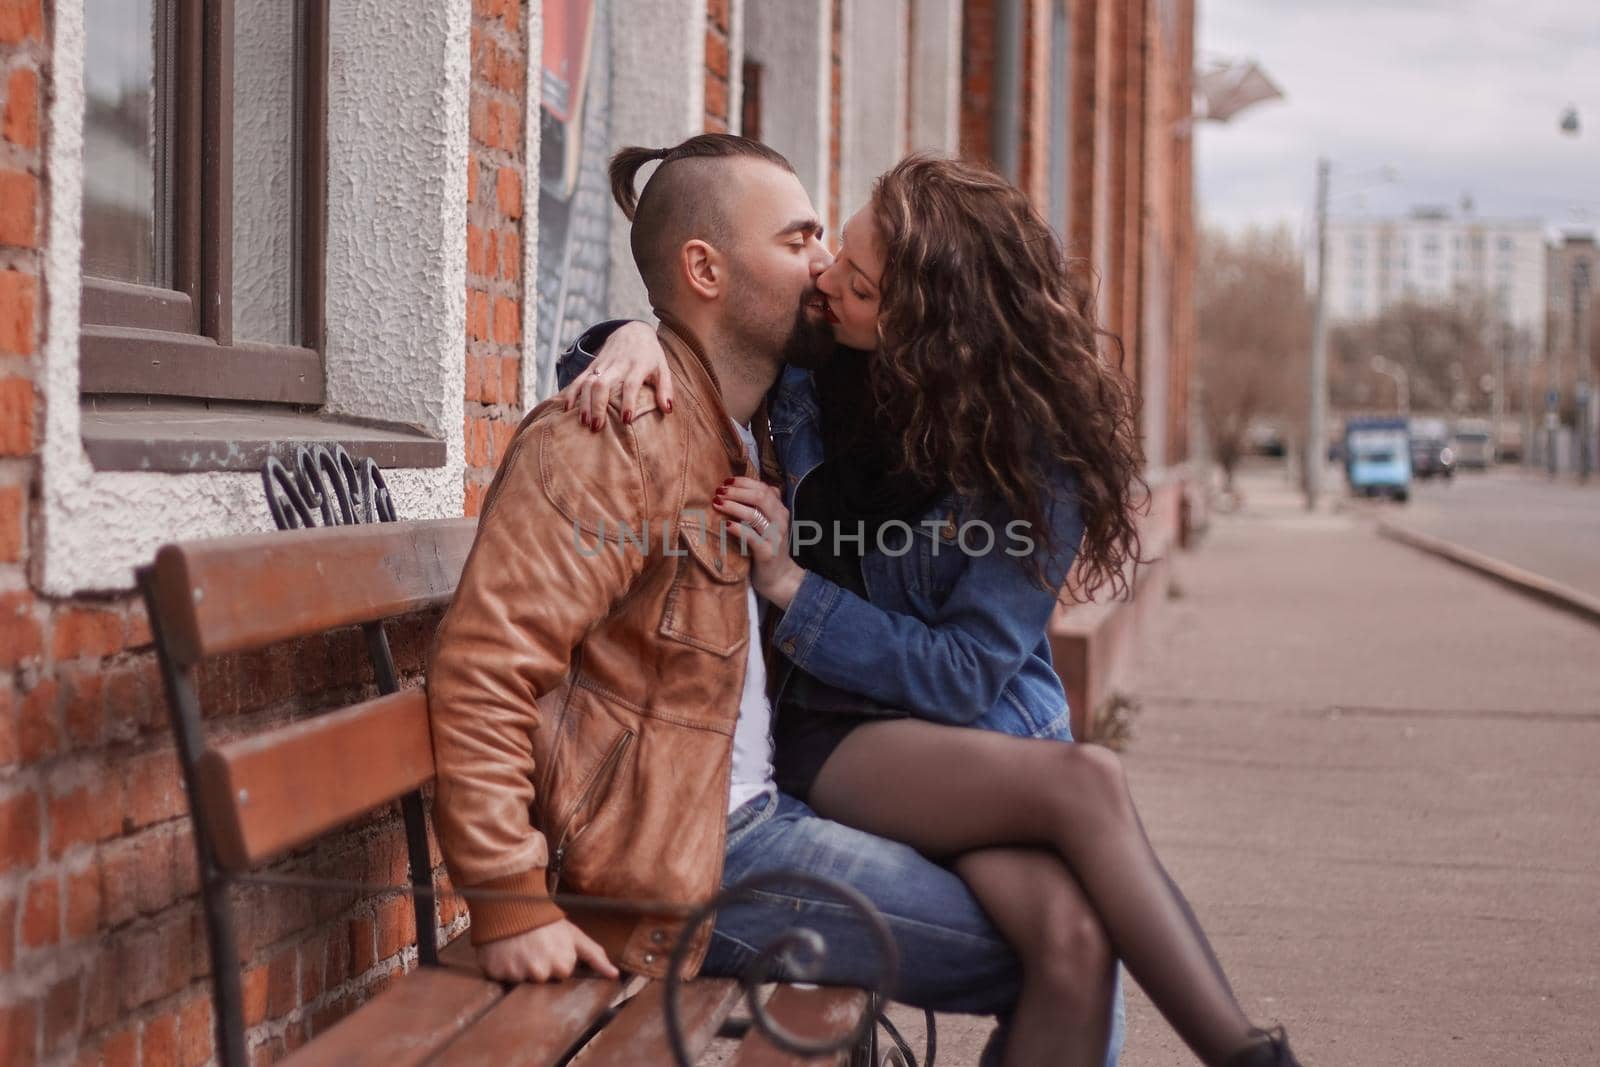 romantic couple in love kissing, sitting on the bench . the concept of love and relationships